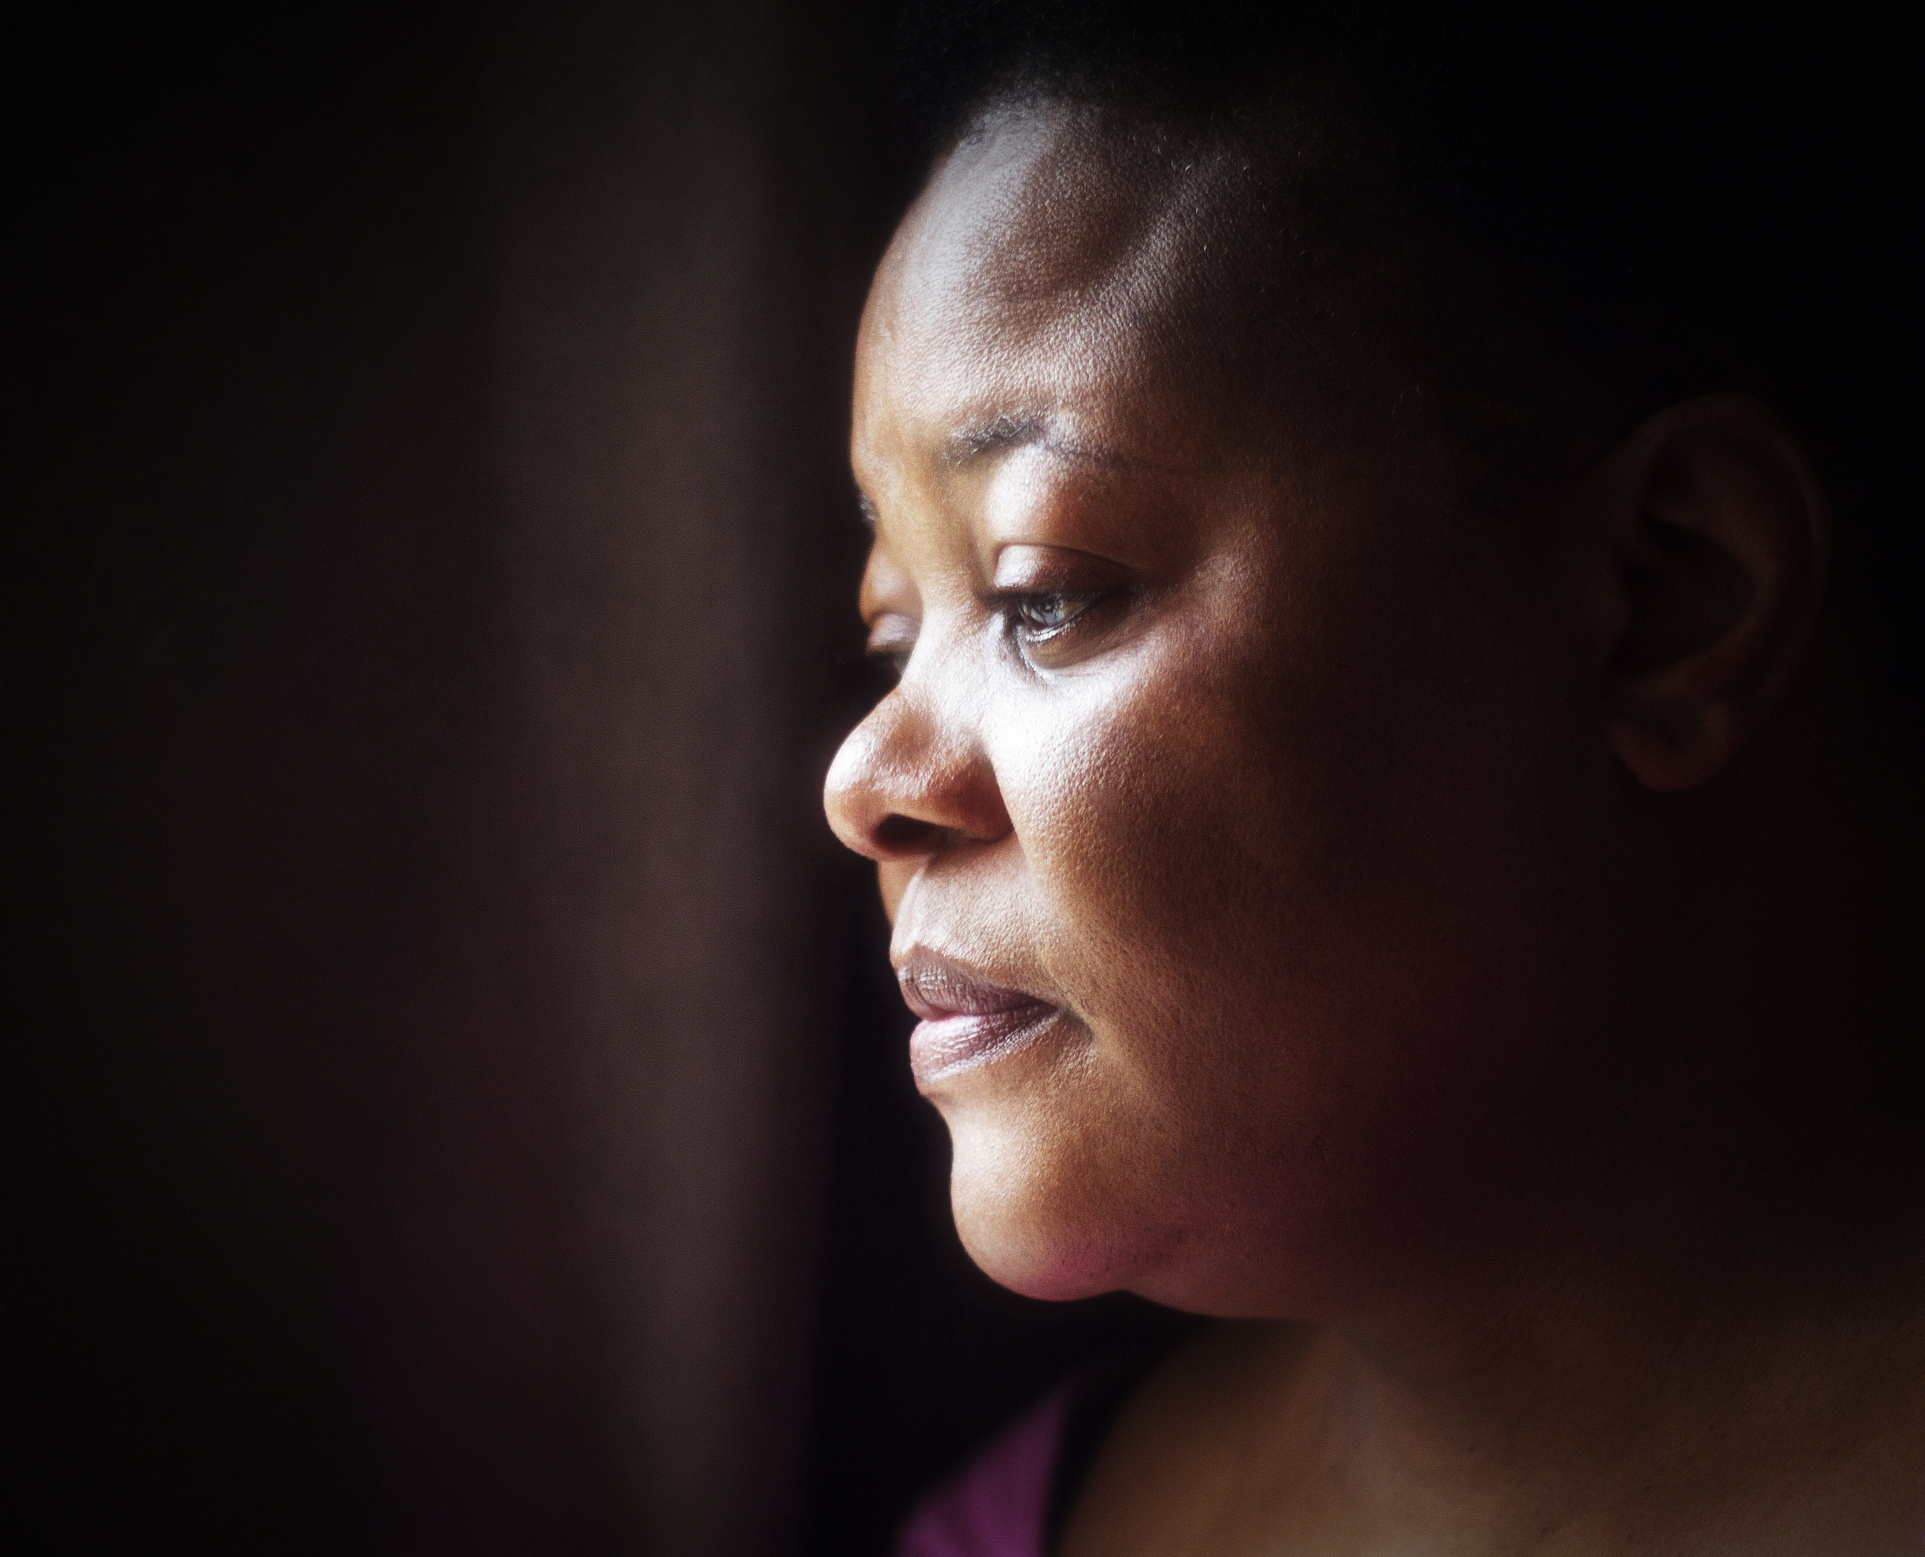 portrait of mature woman of African descent with thoughtful expression